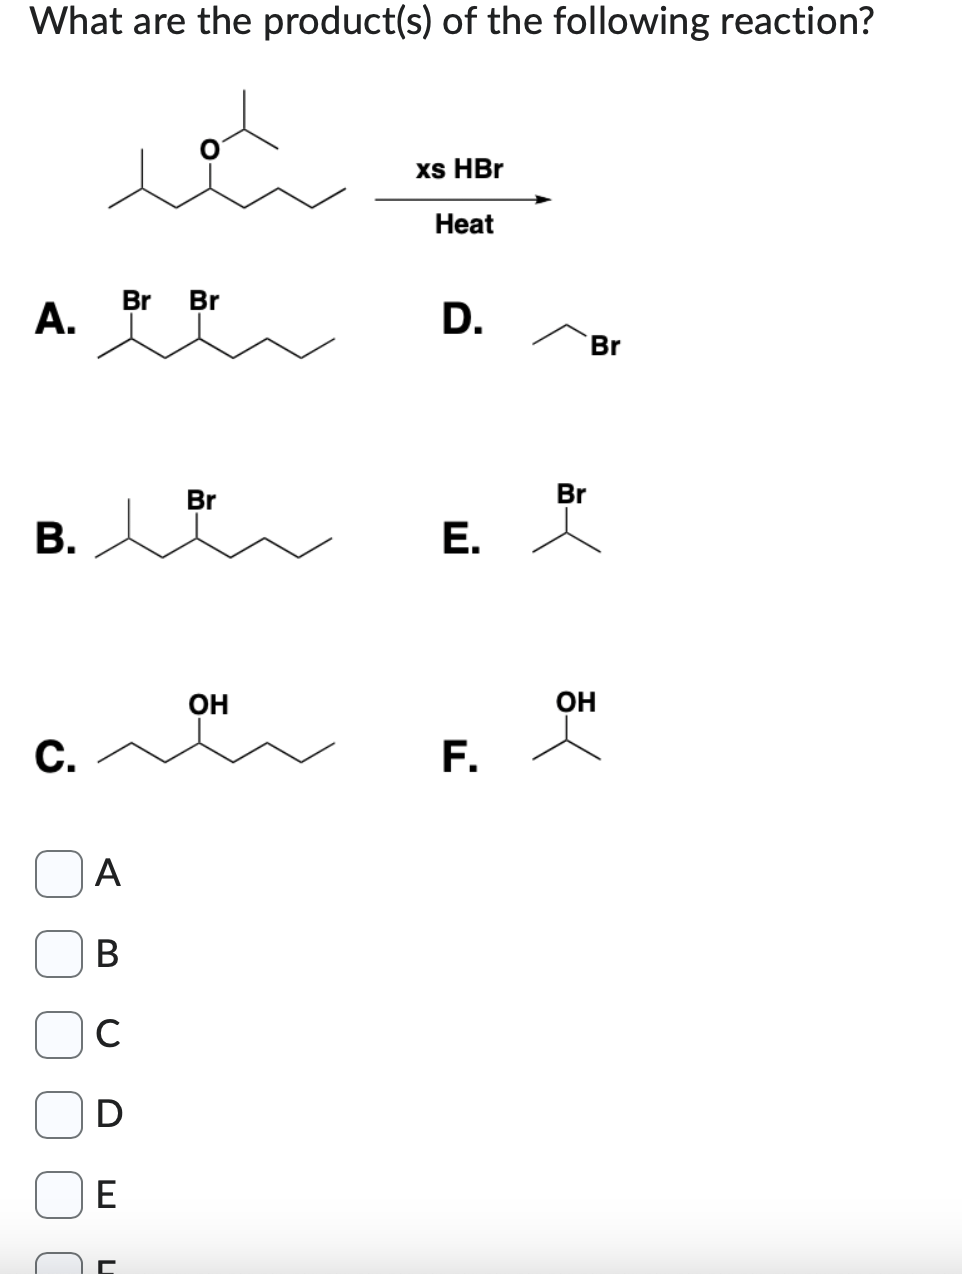 What are the product(s) of the following reaction?
A.
B.
C.
A
B
с
E
Br Br
U
Br
OH
xs HBr
Heat
D.
E.
F.
Br
Br
OH
<